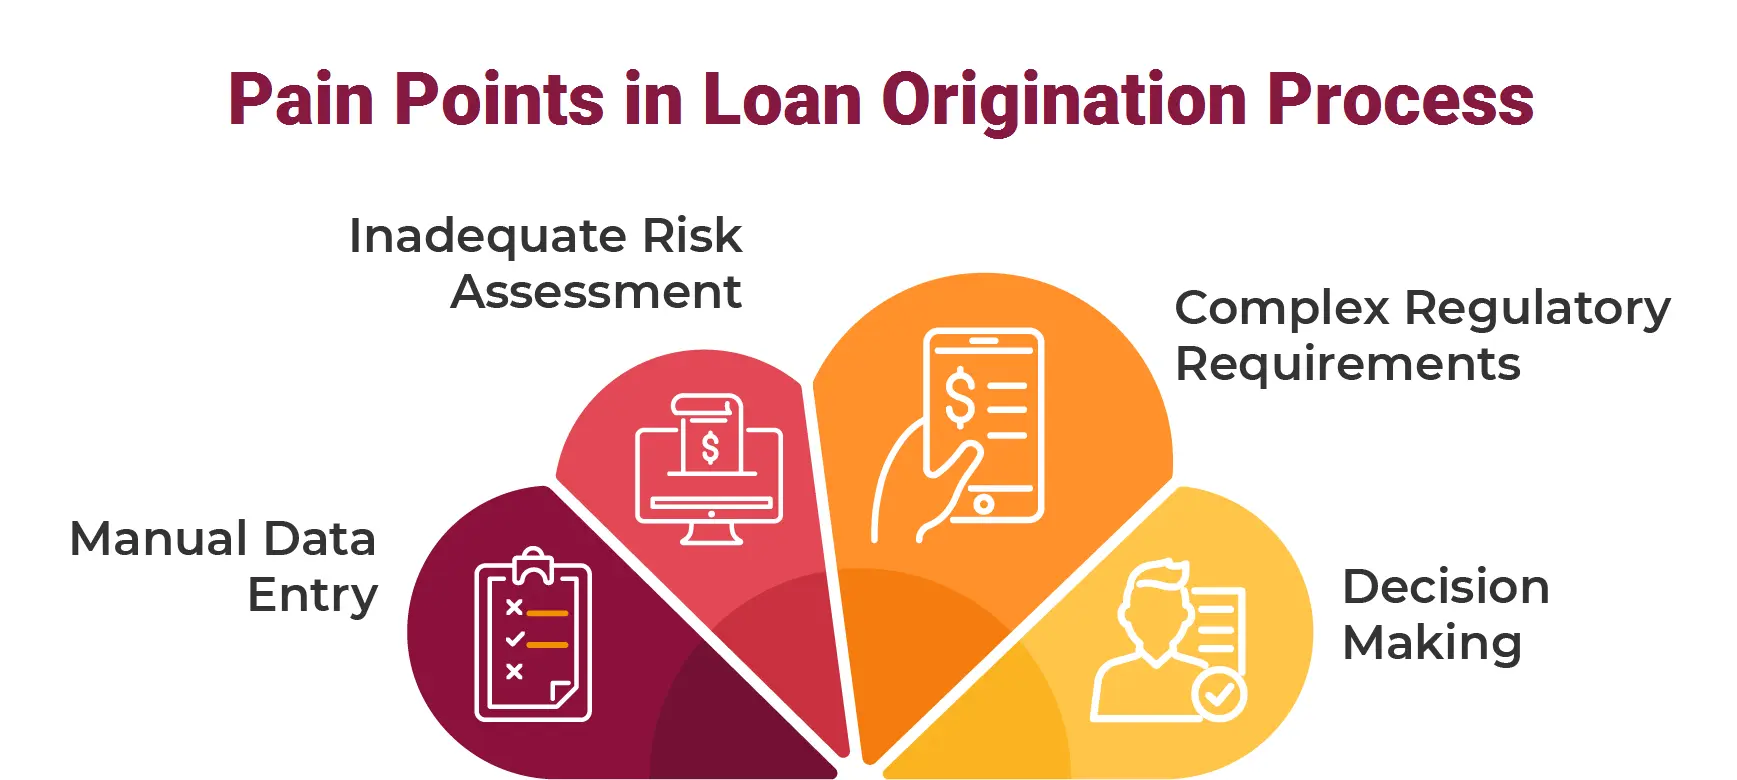 Pain Points & Cost of Loan Origination Process